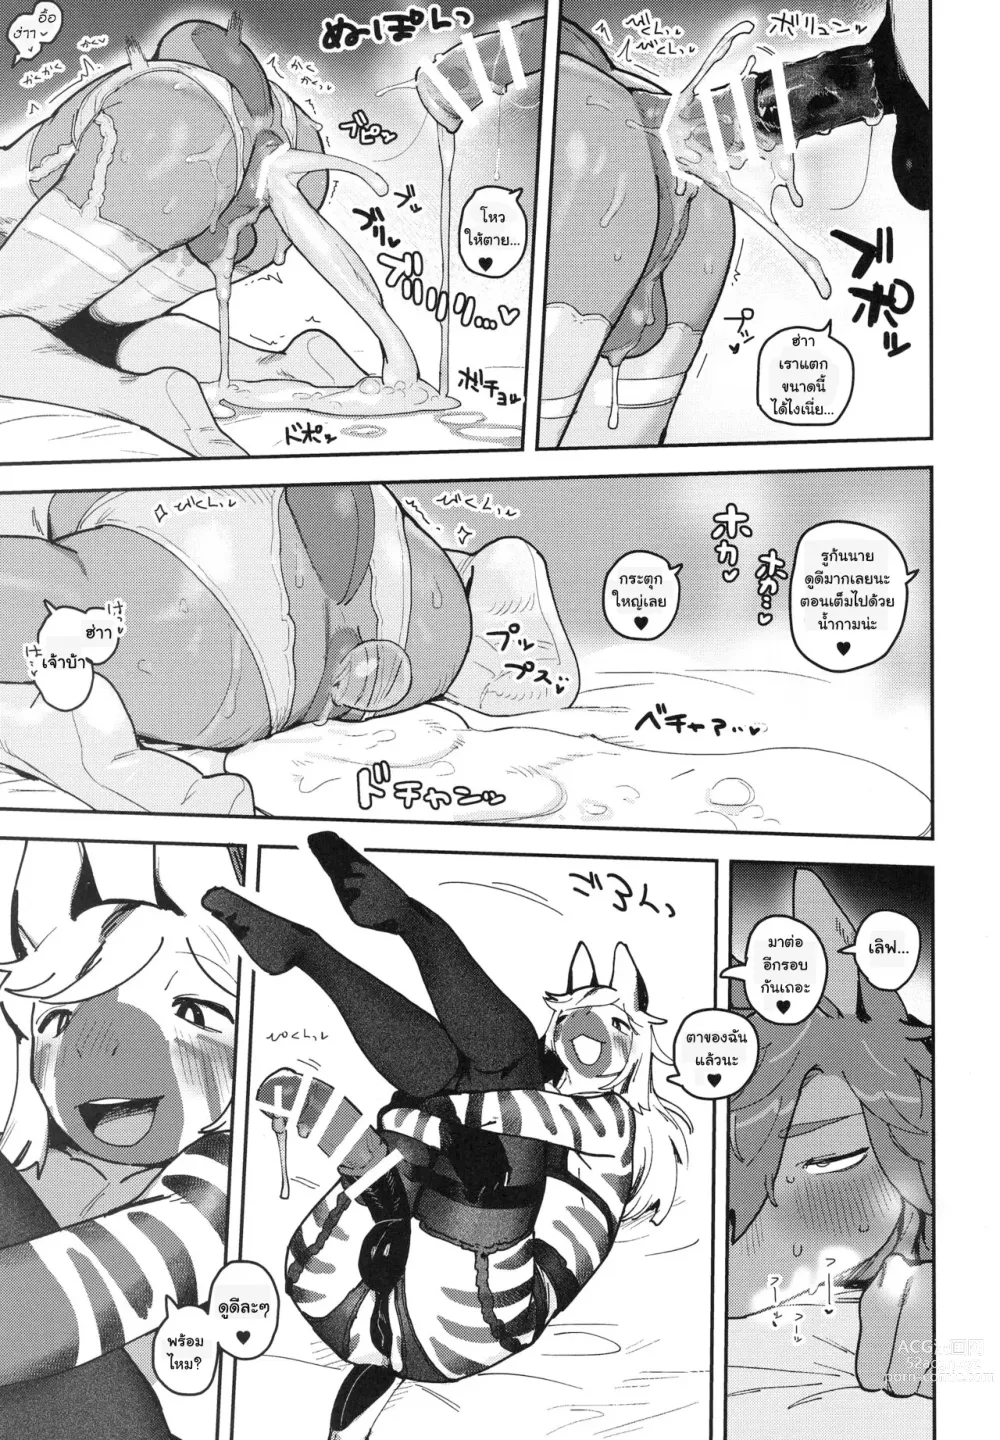 Page 37 of doujinshi HORNY HORSE